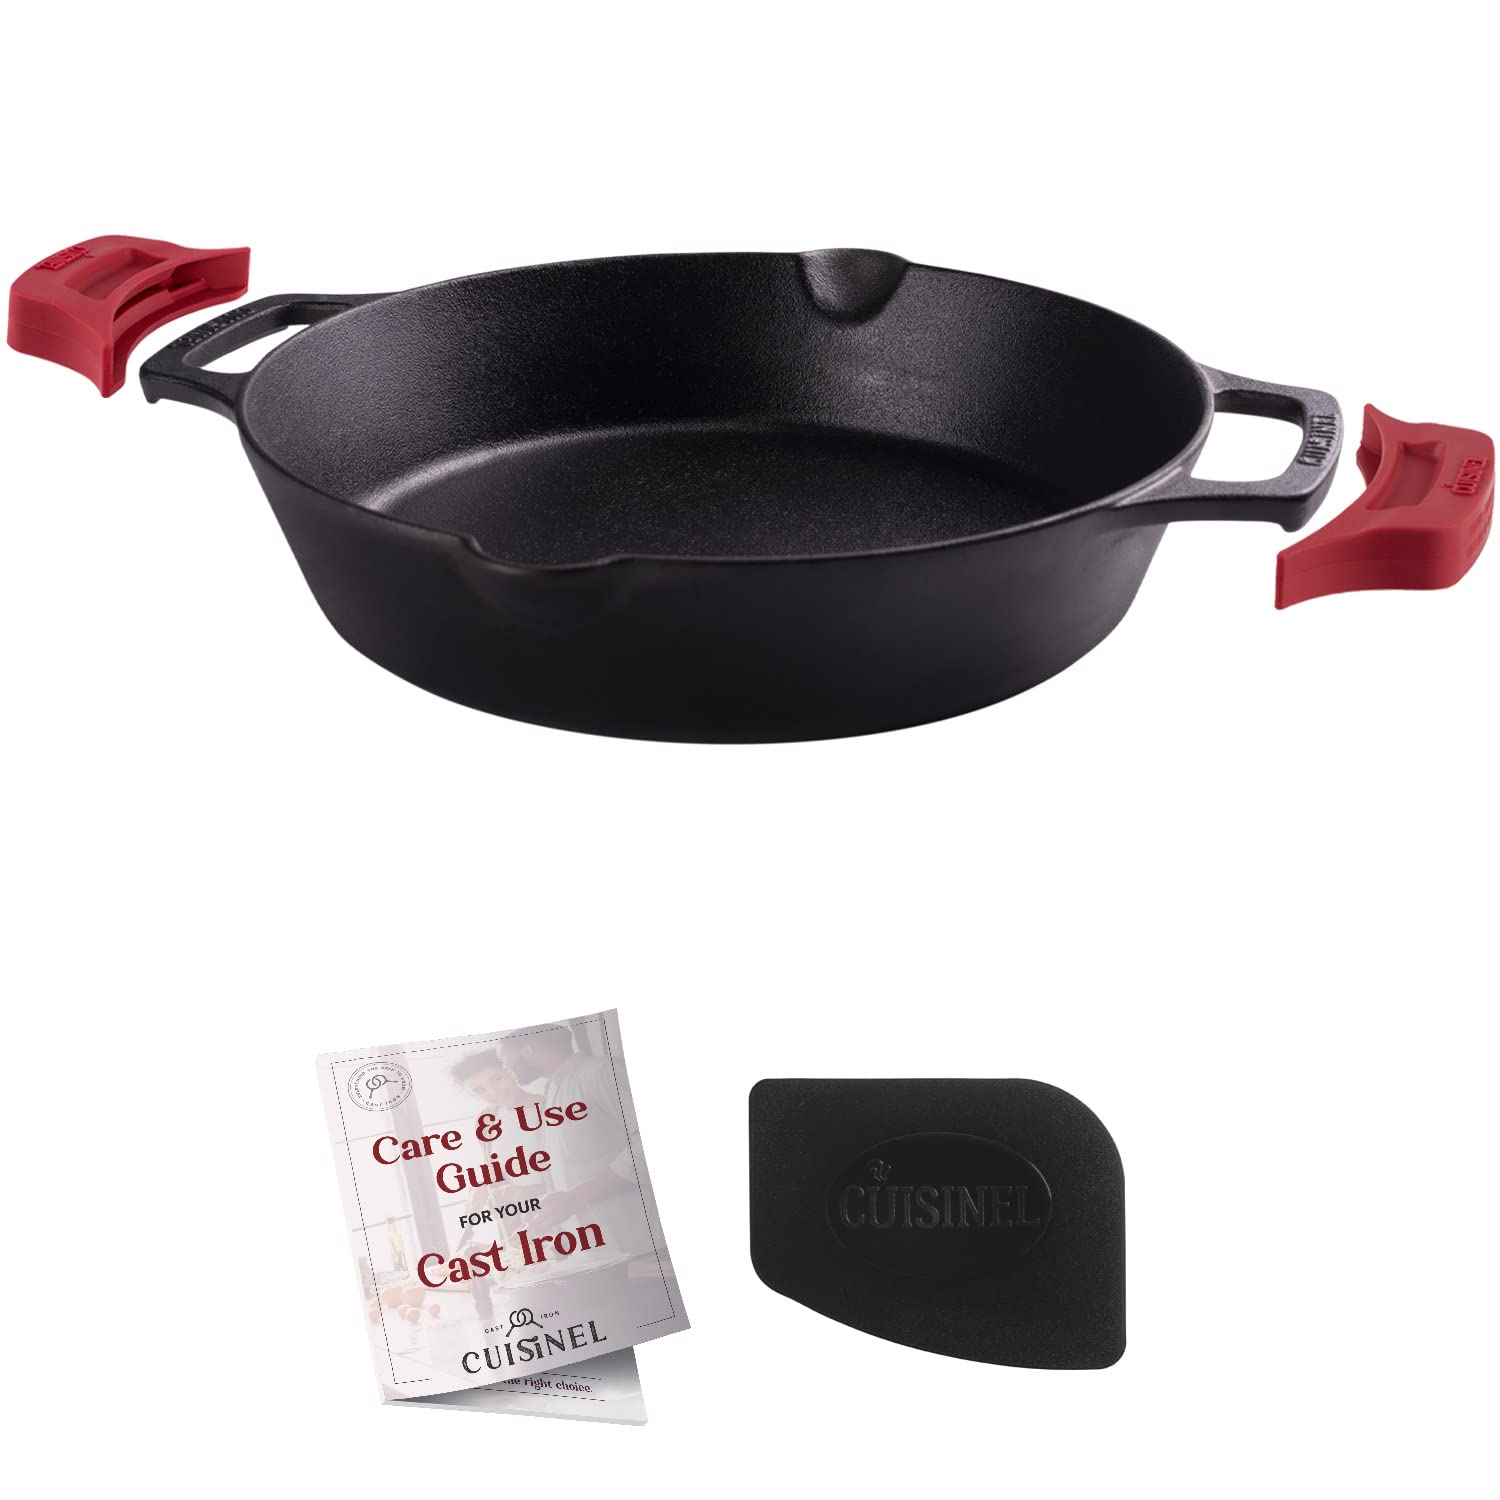 Cuisinel cast Iron Skillet - 10-Inch Dual Handle Frying Pan +